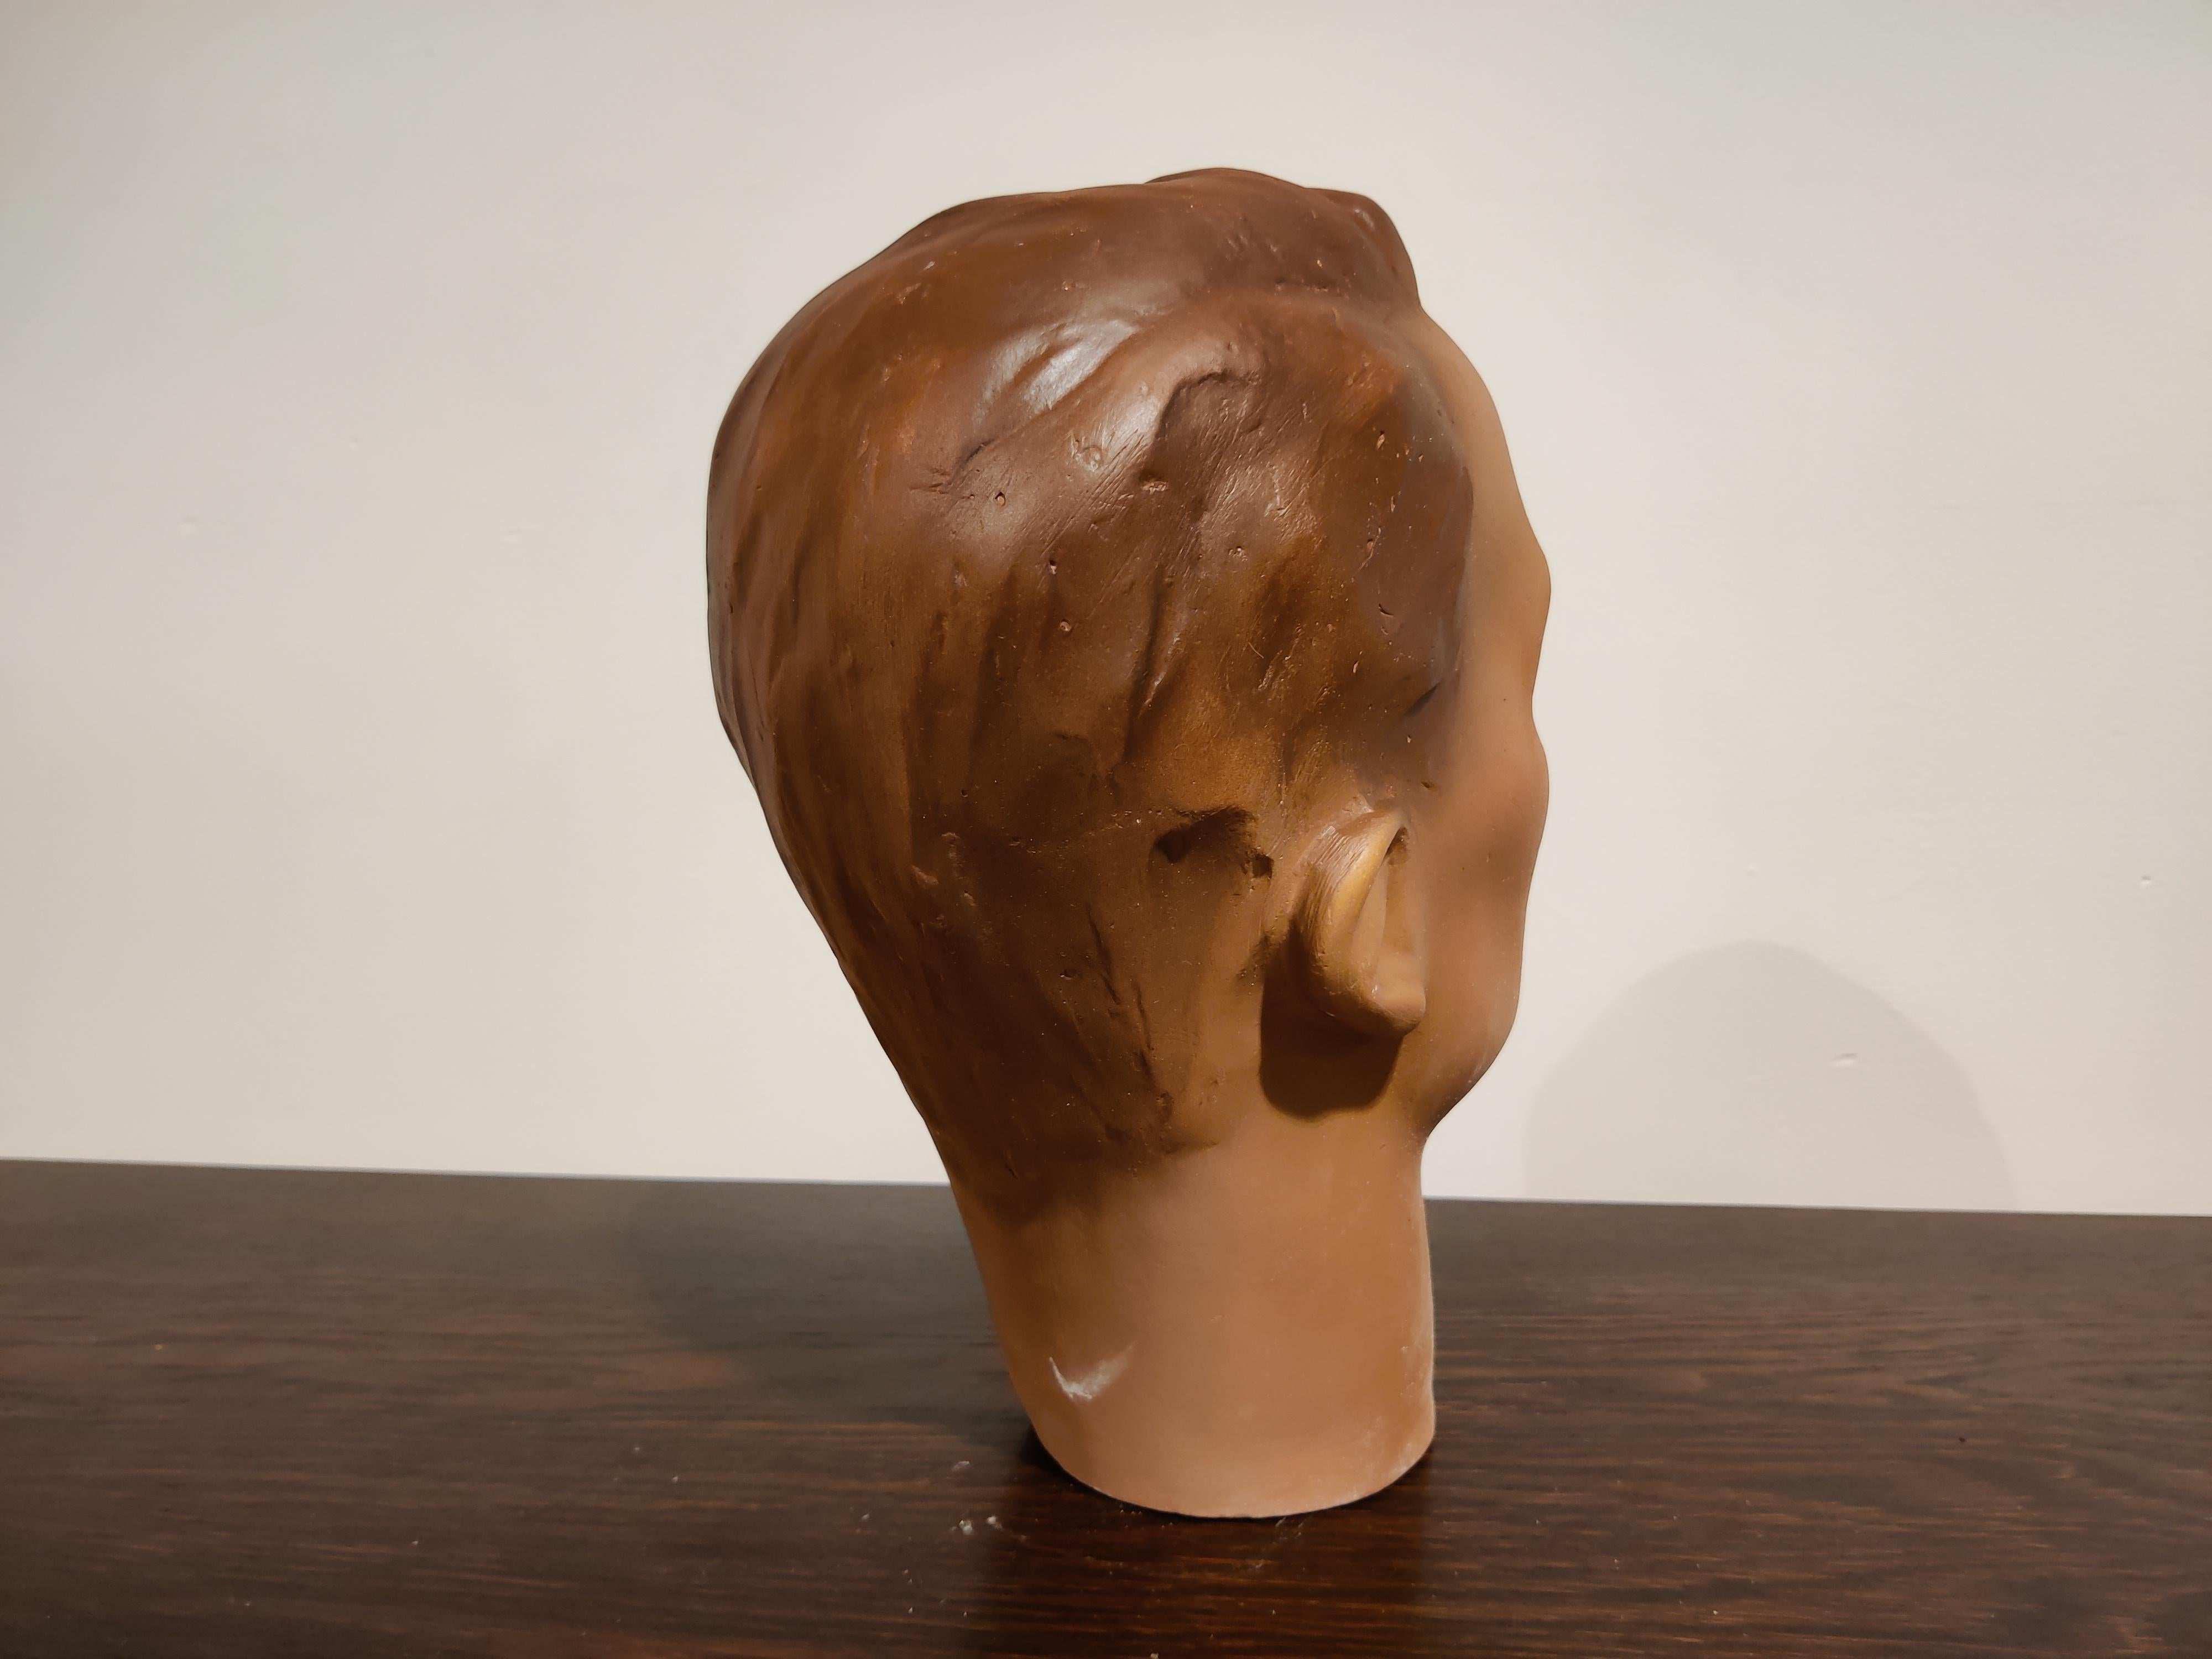 Beautiful male mannequin head made from plaster. 

It has some minor user traces.

Comes from a lot acquired from a clothes shop that stopped activities.

Great decorative item to display glasses, hats.

France, 1960s

Size: Height